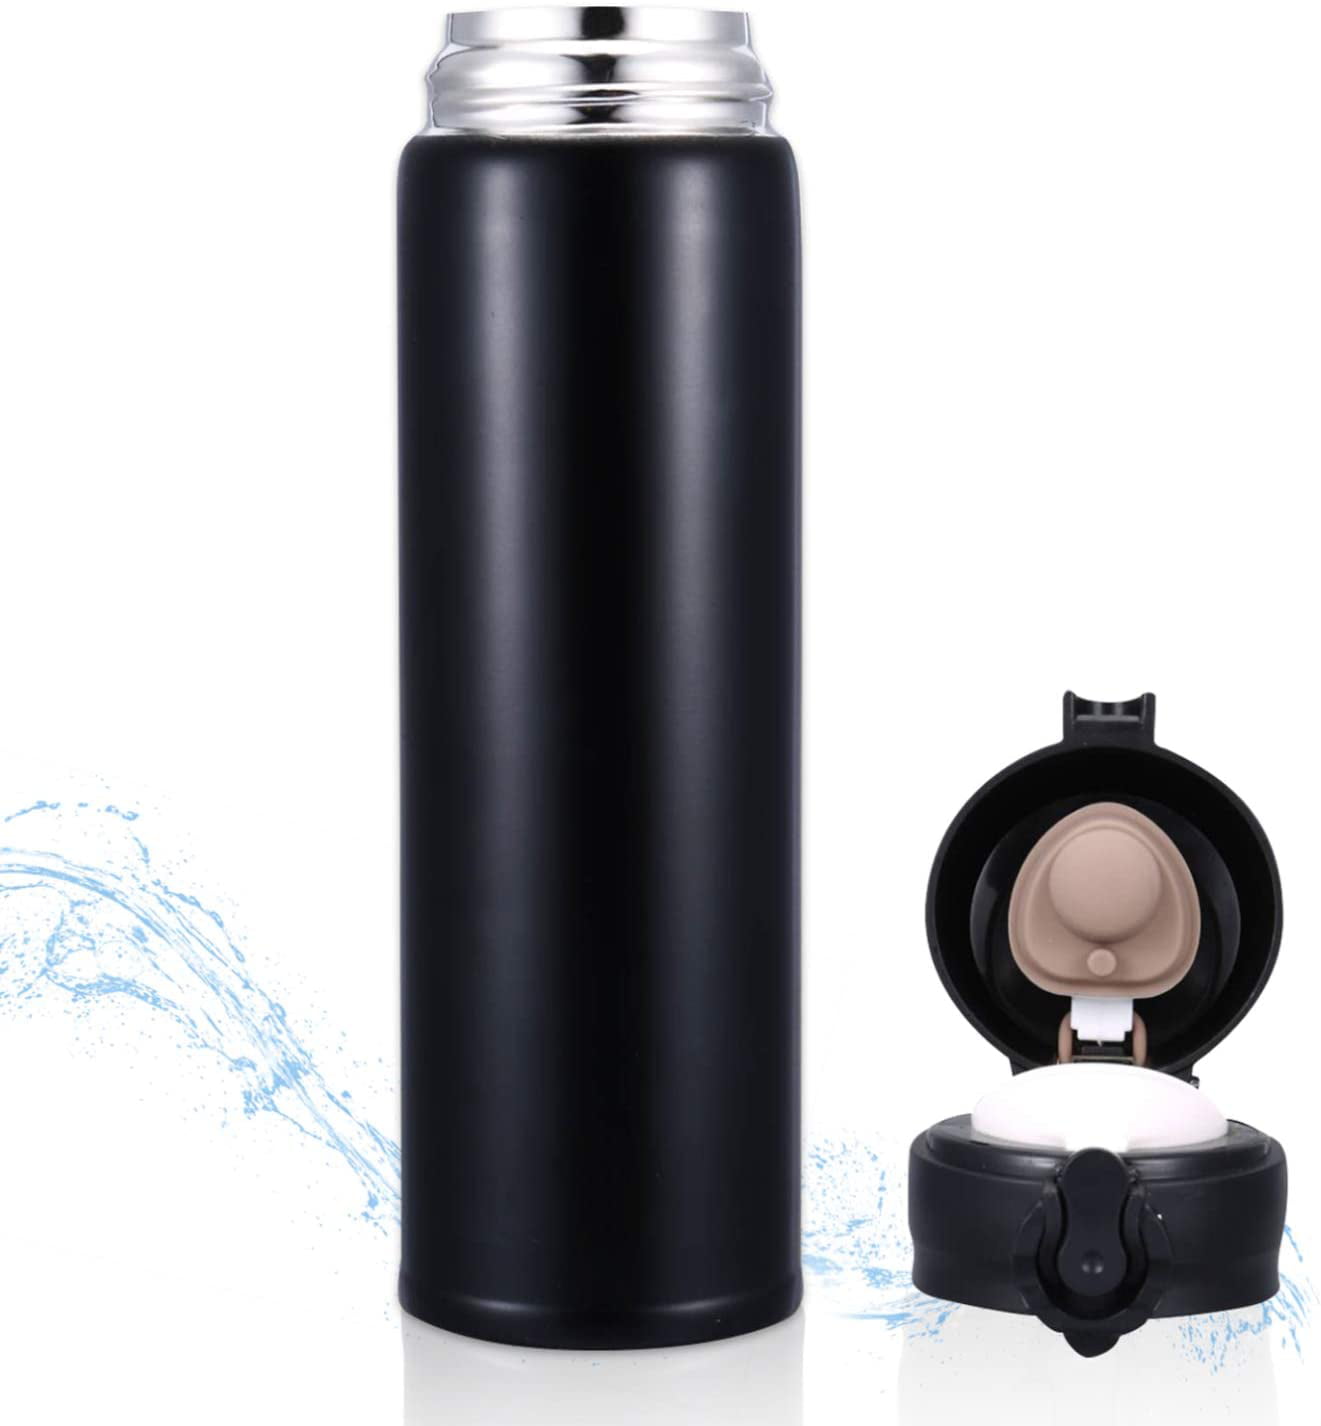 Stainless Steel Vacuum Flask Insulated Water Bottle Thermos Hot Tea Coffee Drink 